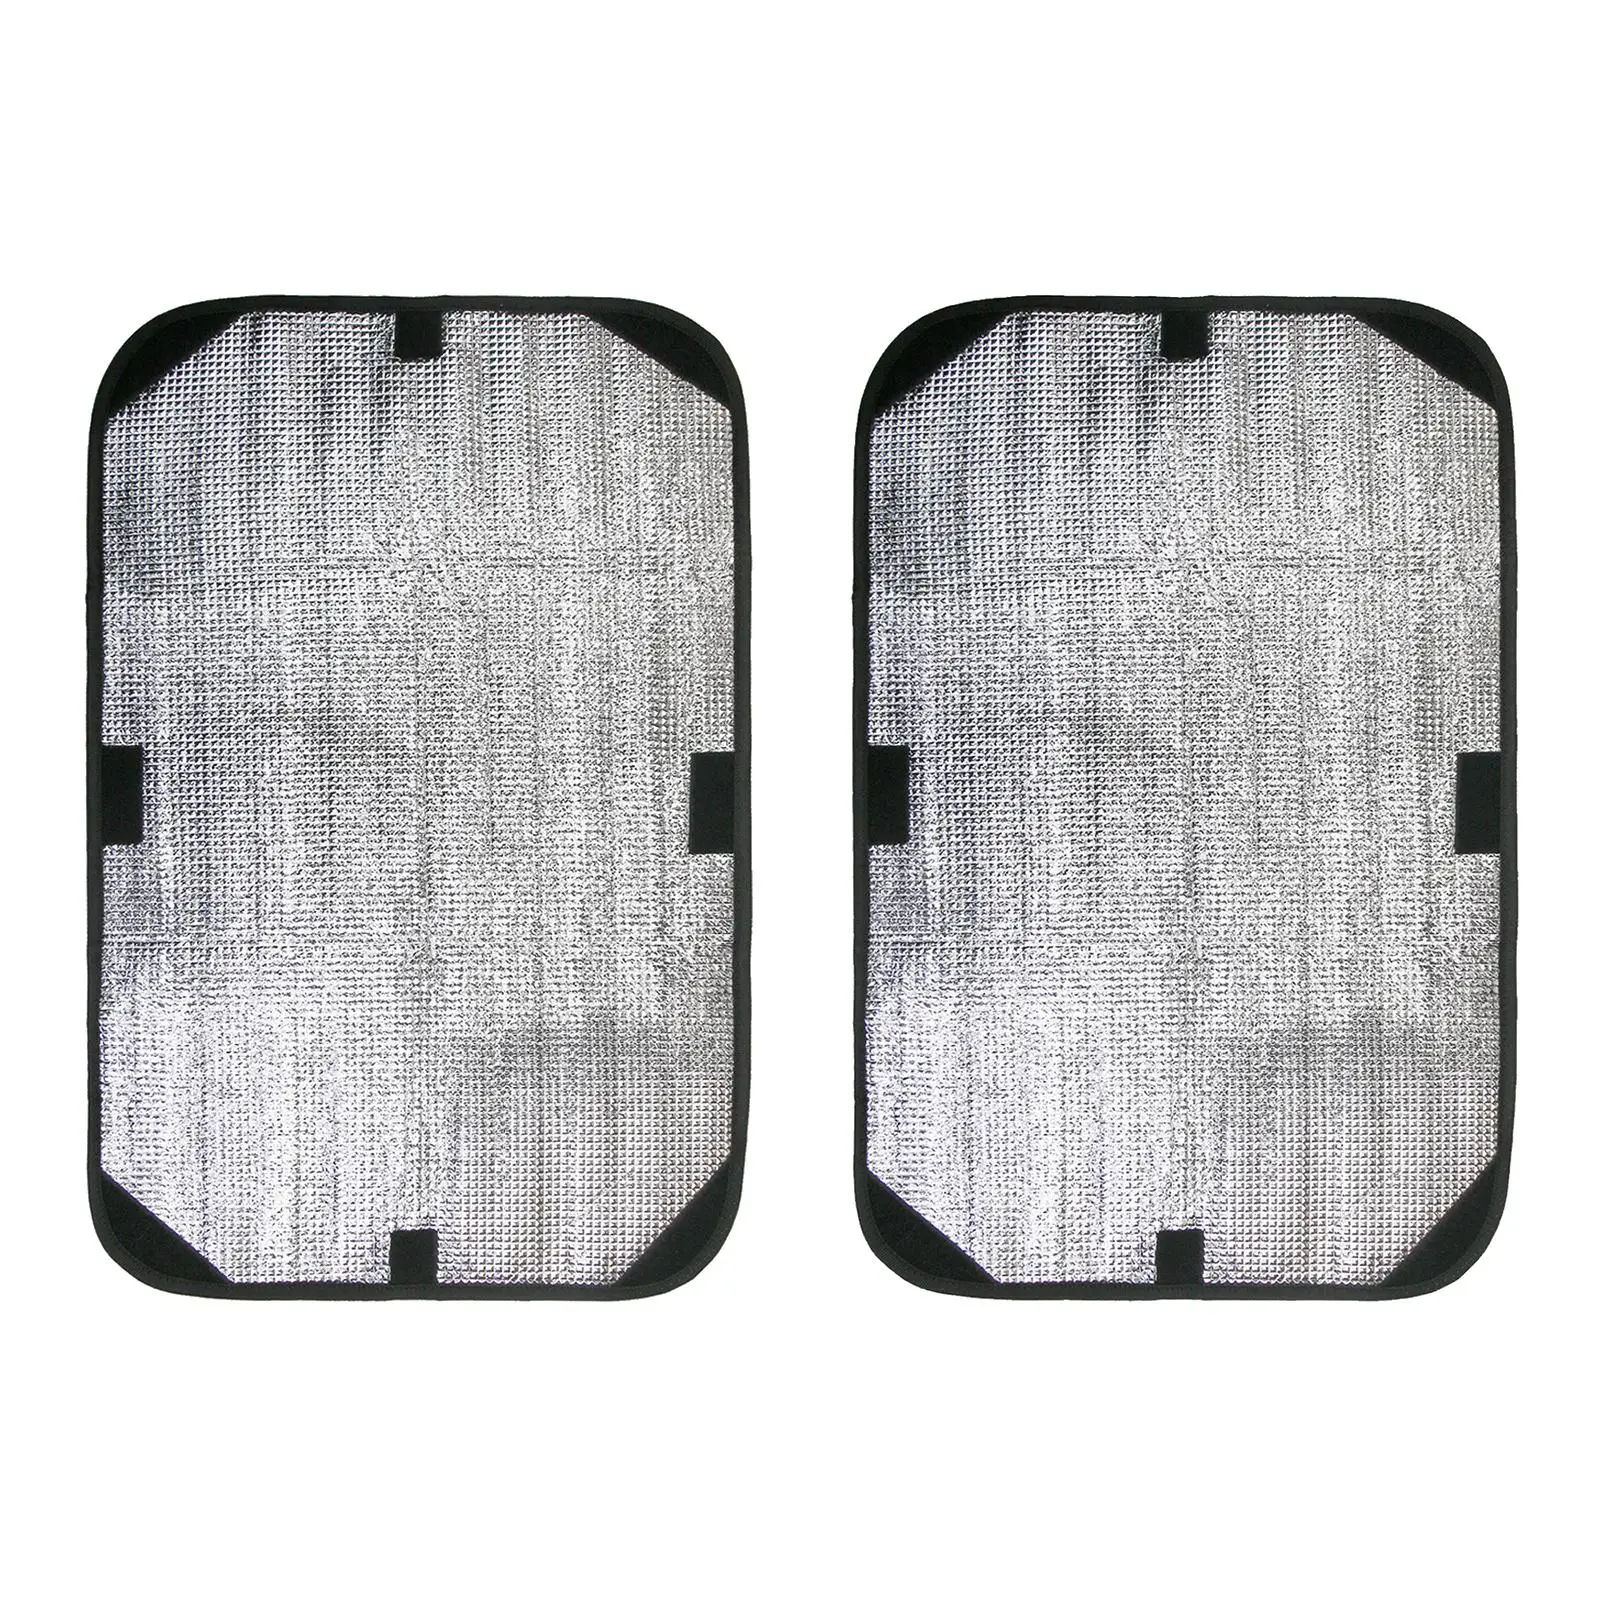 2Pcs RV Door Window Shade Cover 15.94x24.41inch Fit for Motorhome Travel